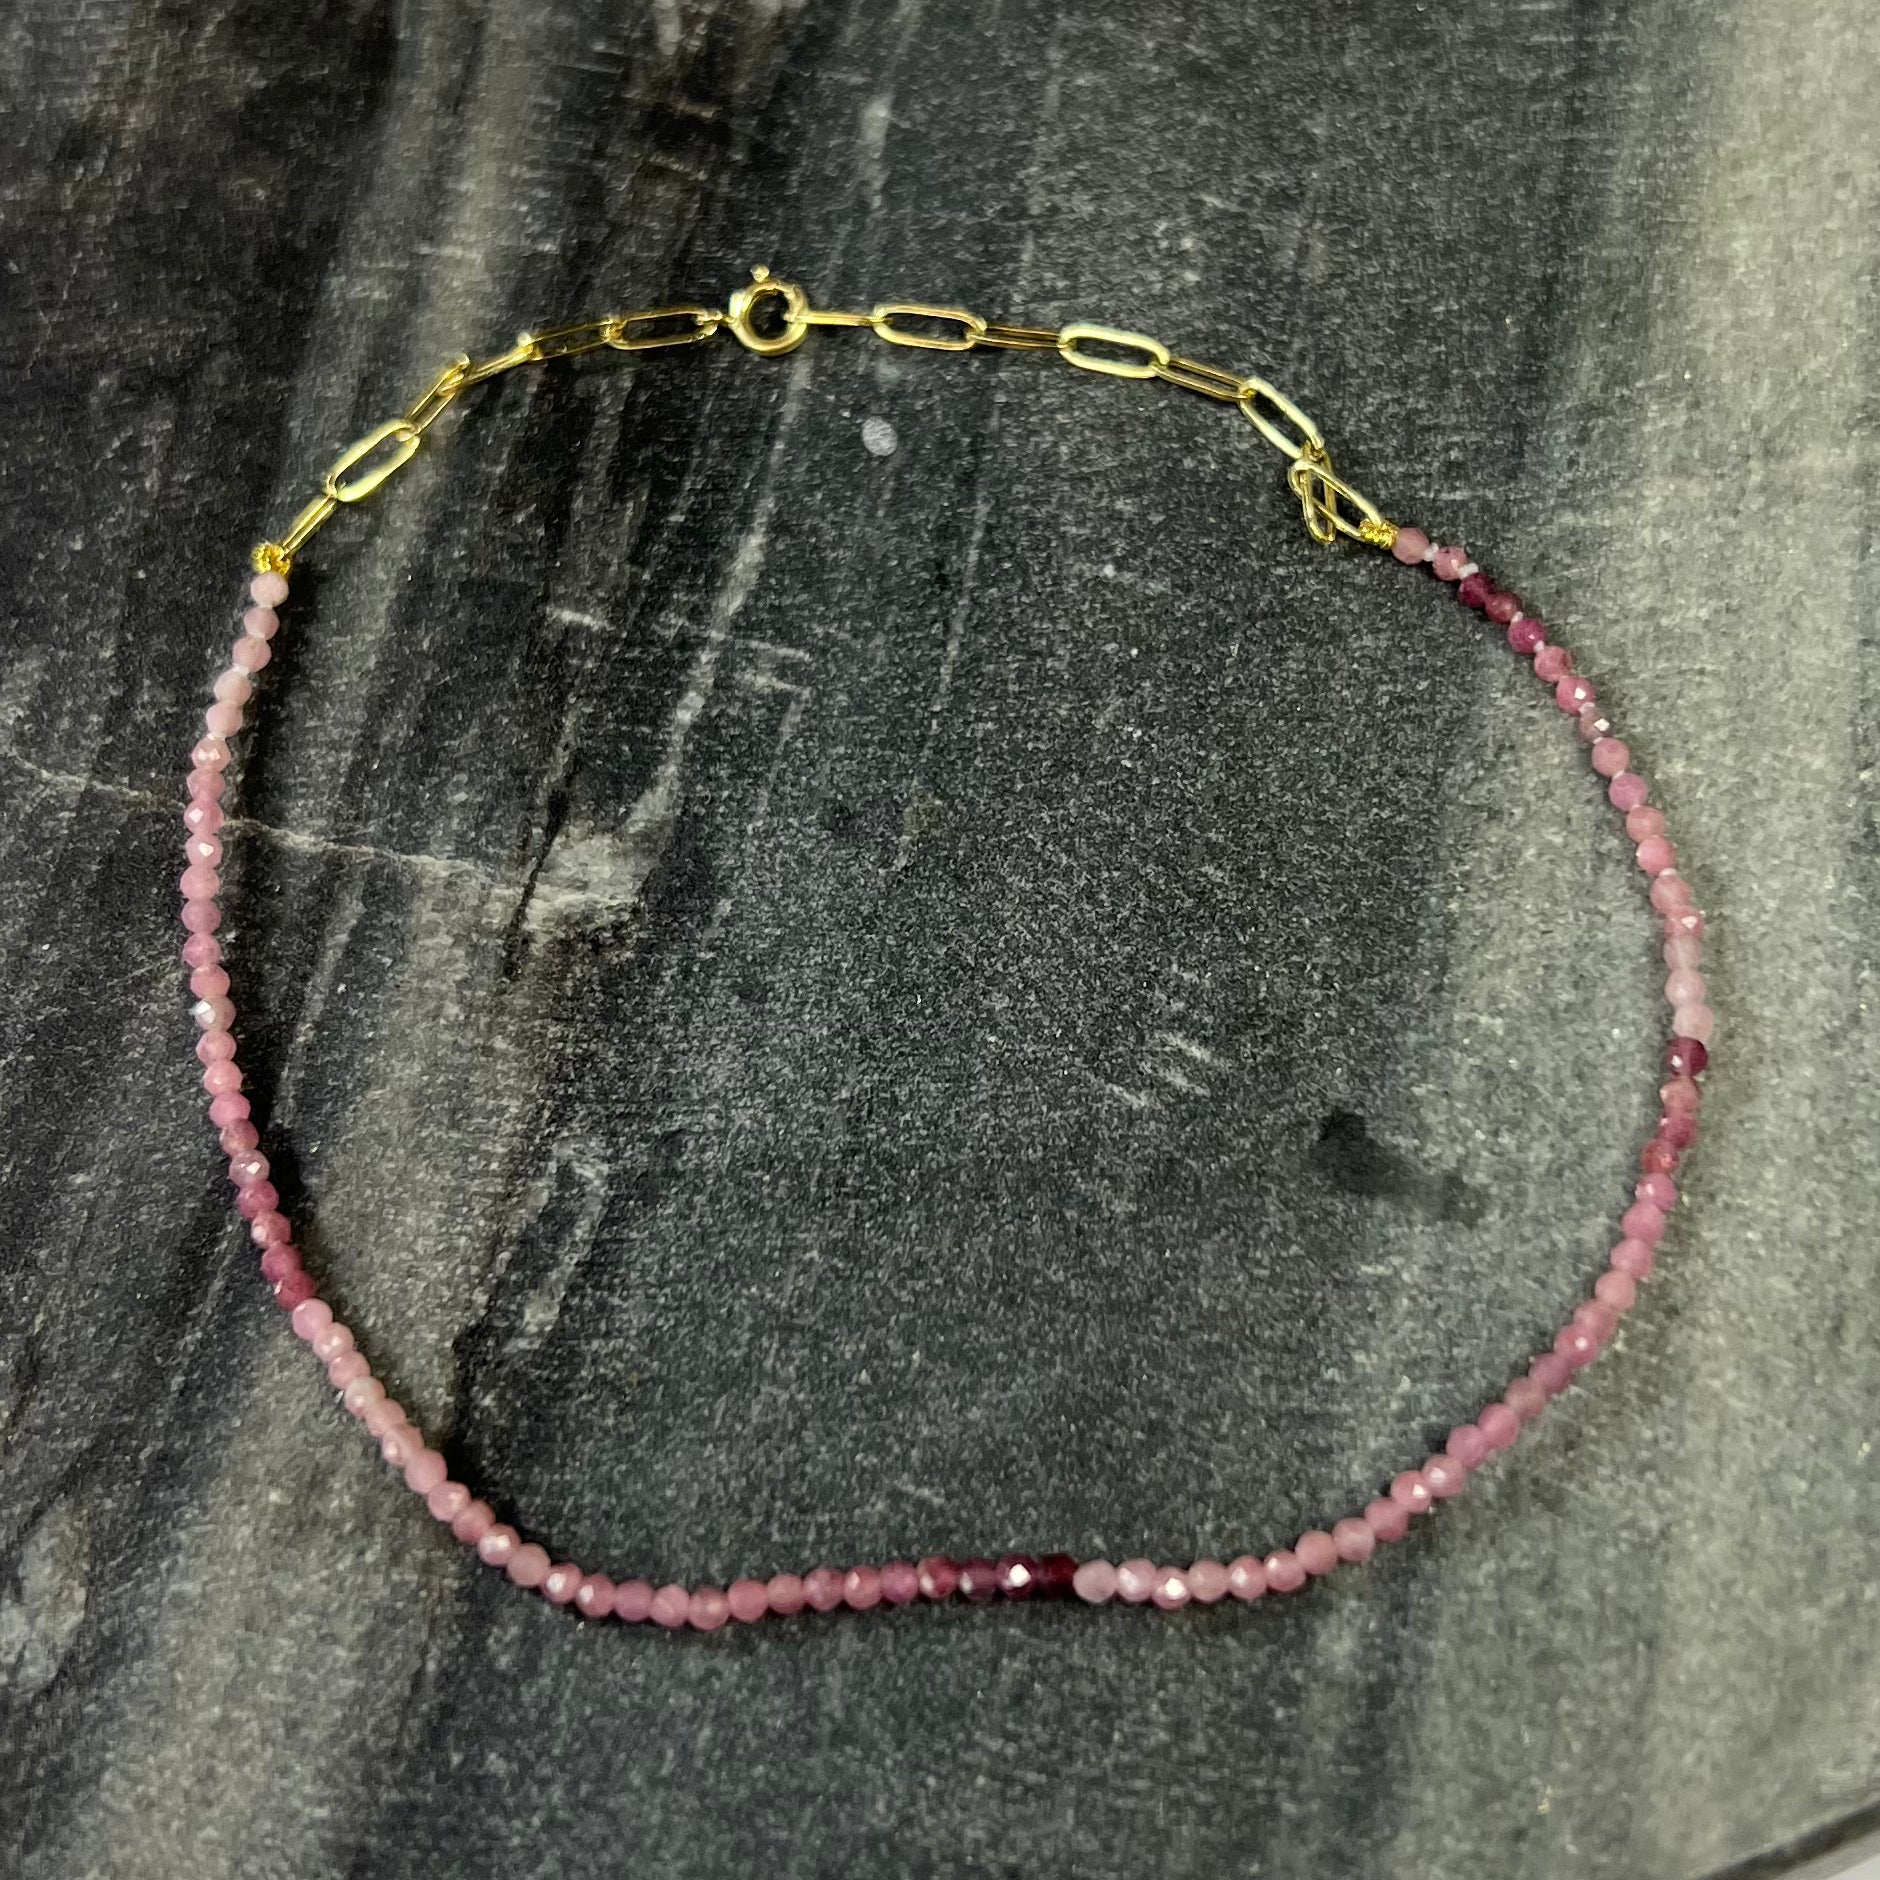 14K Yellow Gold Clasp Pink Sapphire Beaded Anklet 9.5"